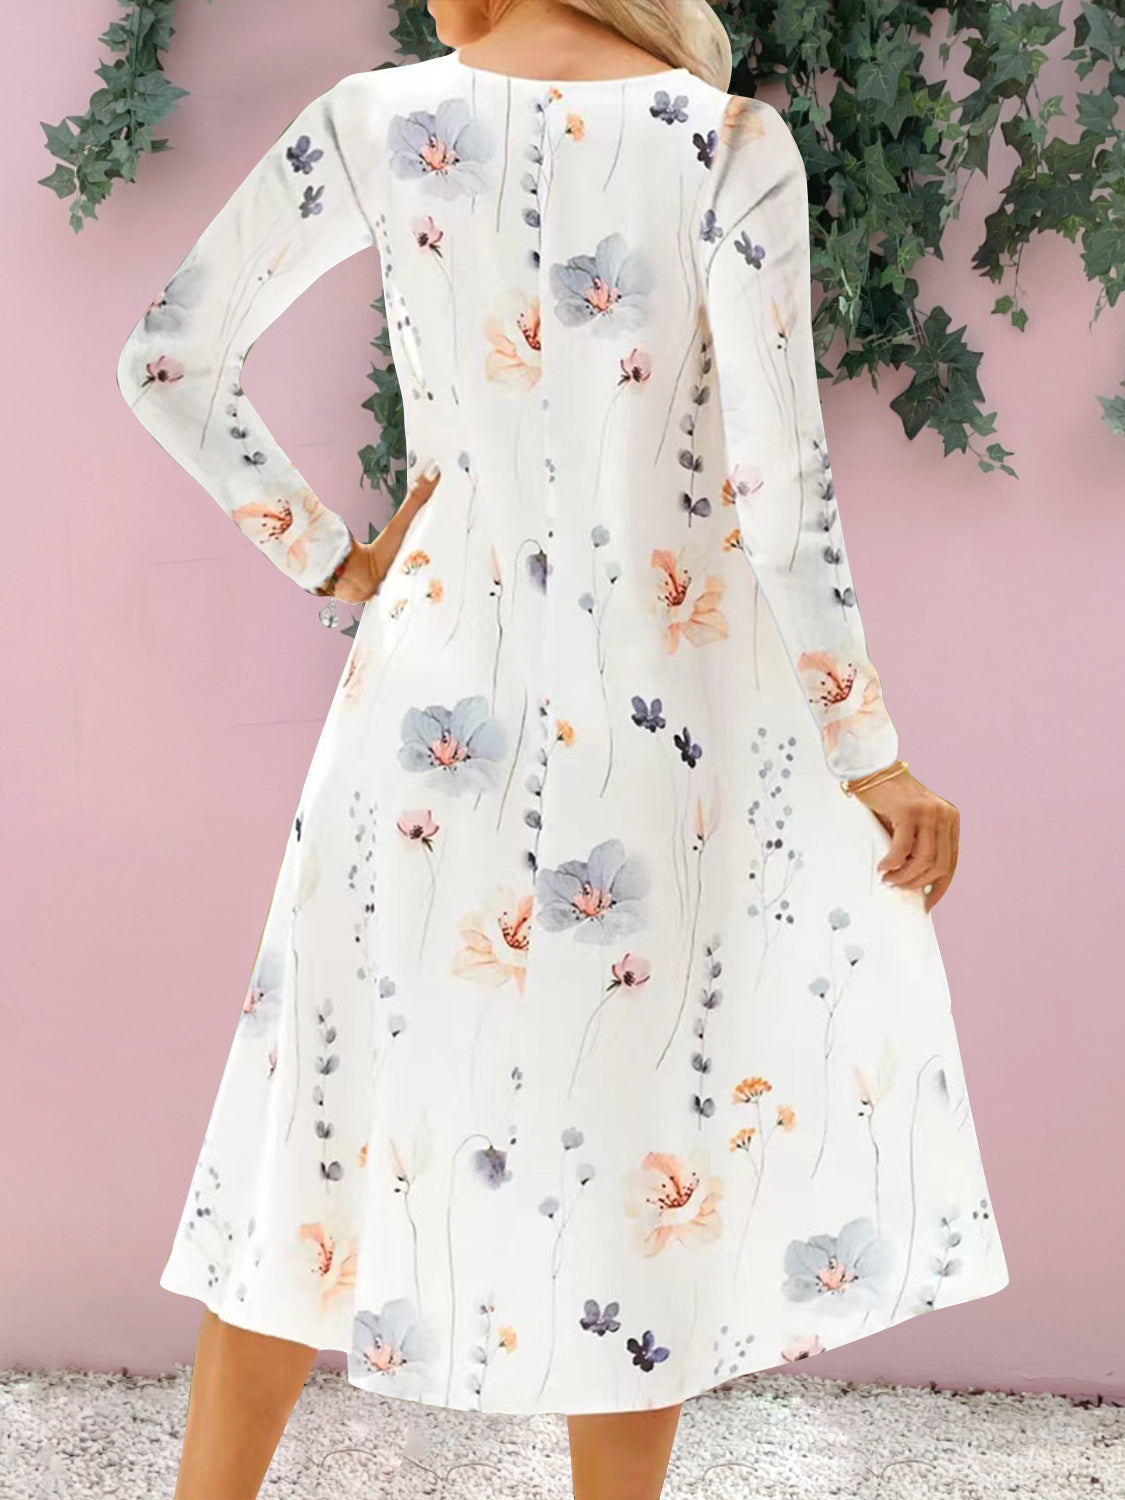 Chic Floral Midi Dress: Perfect Summer Wedding Guest Attire for Women